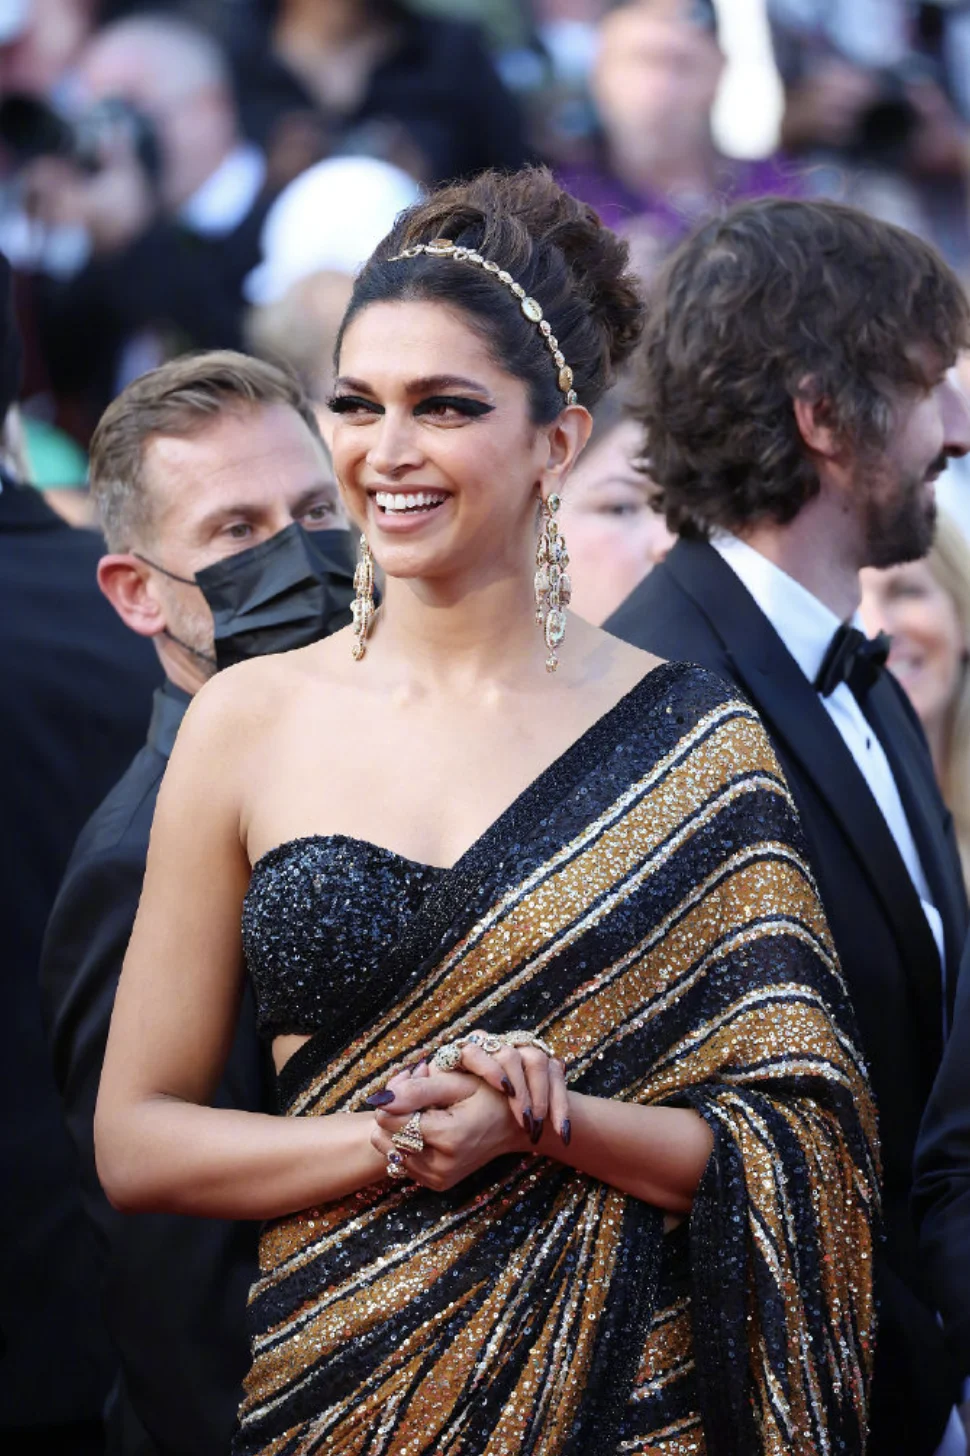 Deepika Padukone on the red carpet at the Cannes Film Festival